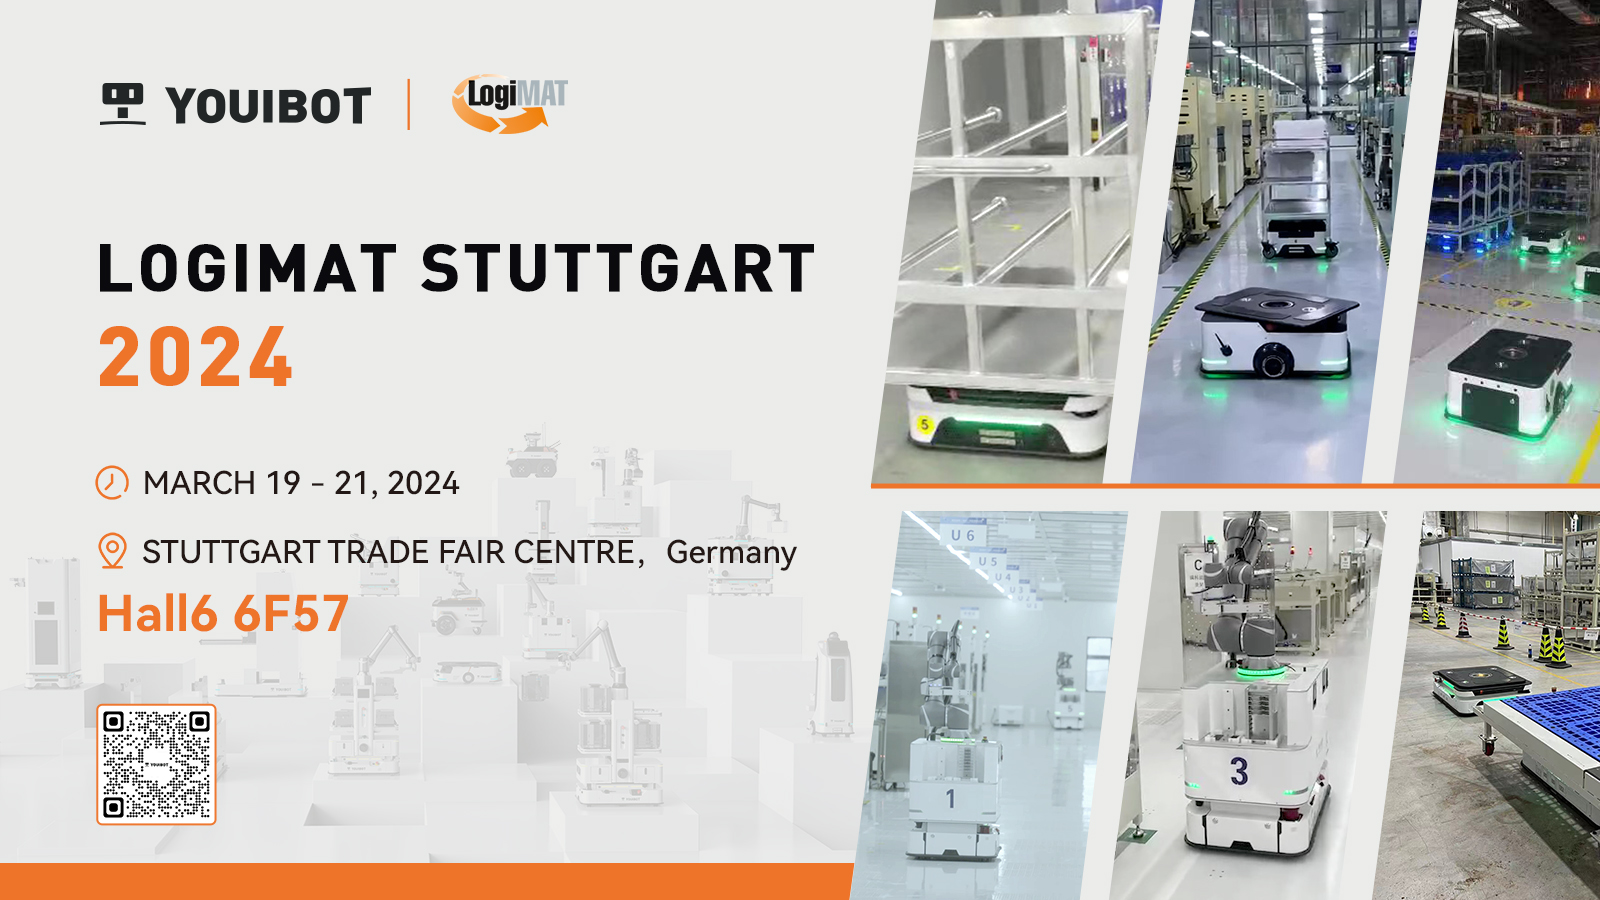 Experience Youibot's Cutting-Edge Robotic Solutions at LogiMAT Stuttgart 2024!